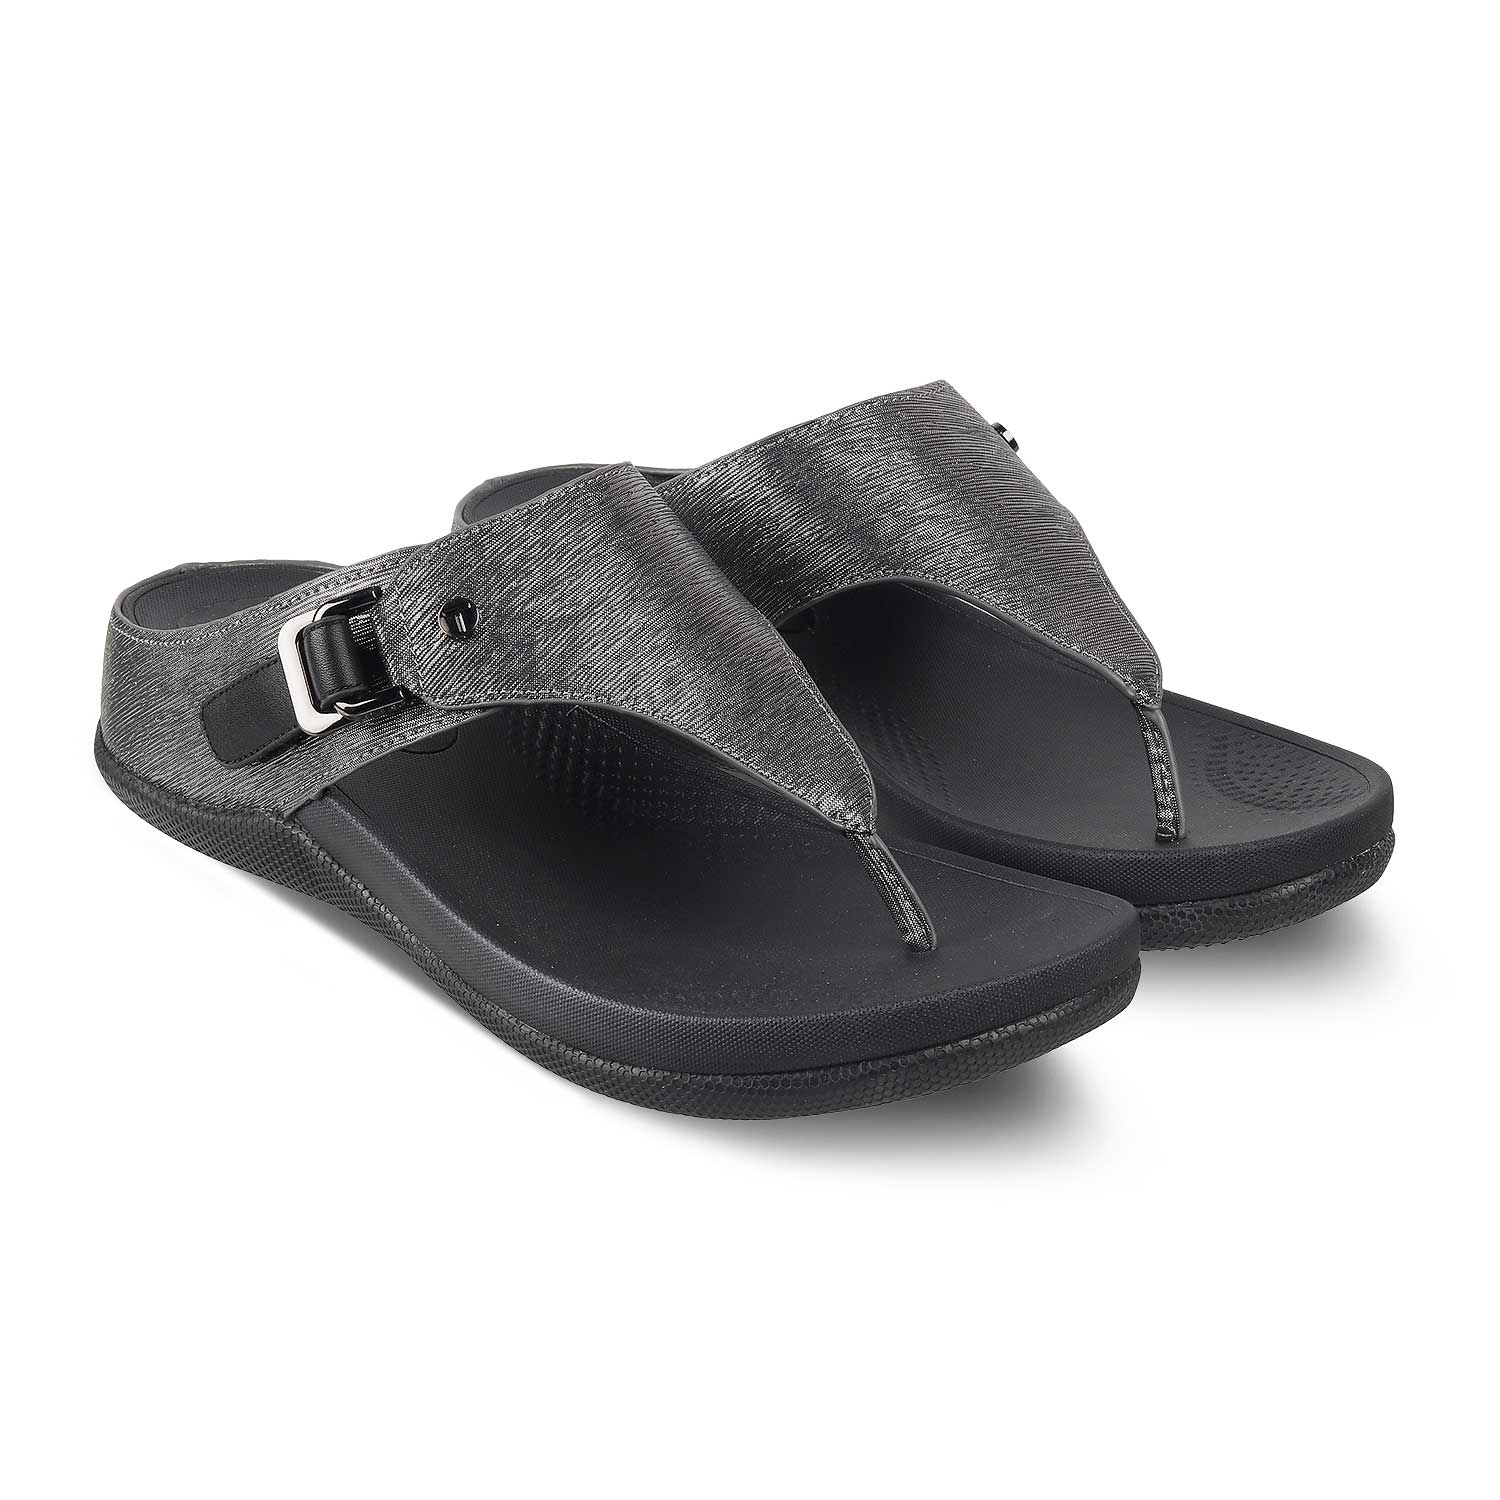 Tresmode-The Belly Black Women's Casual Flats Tresmode-Tresmode